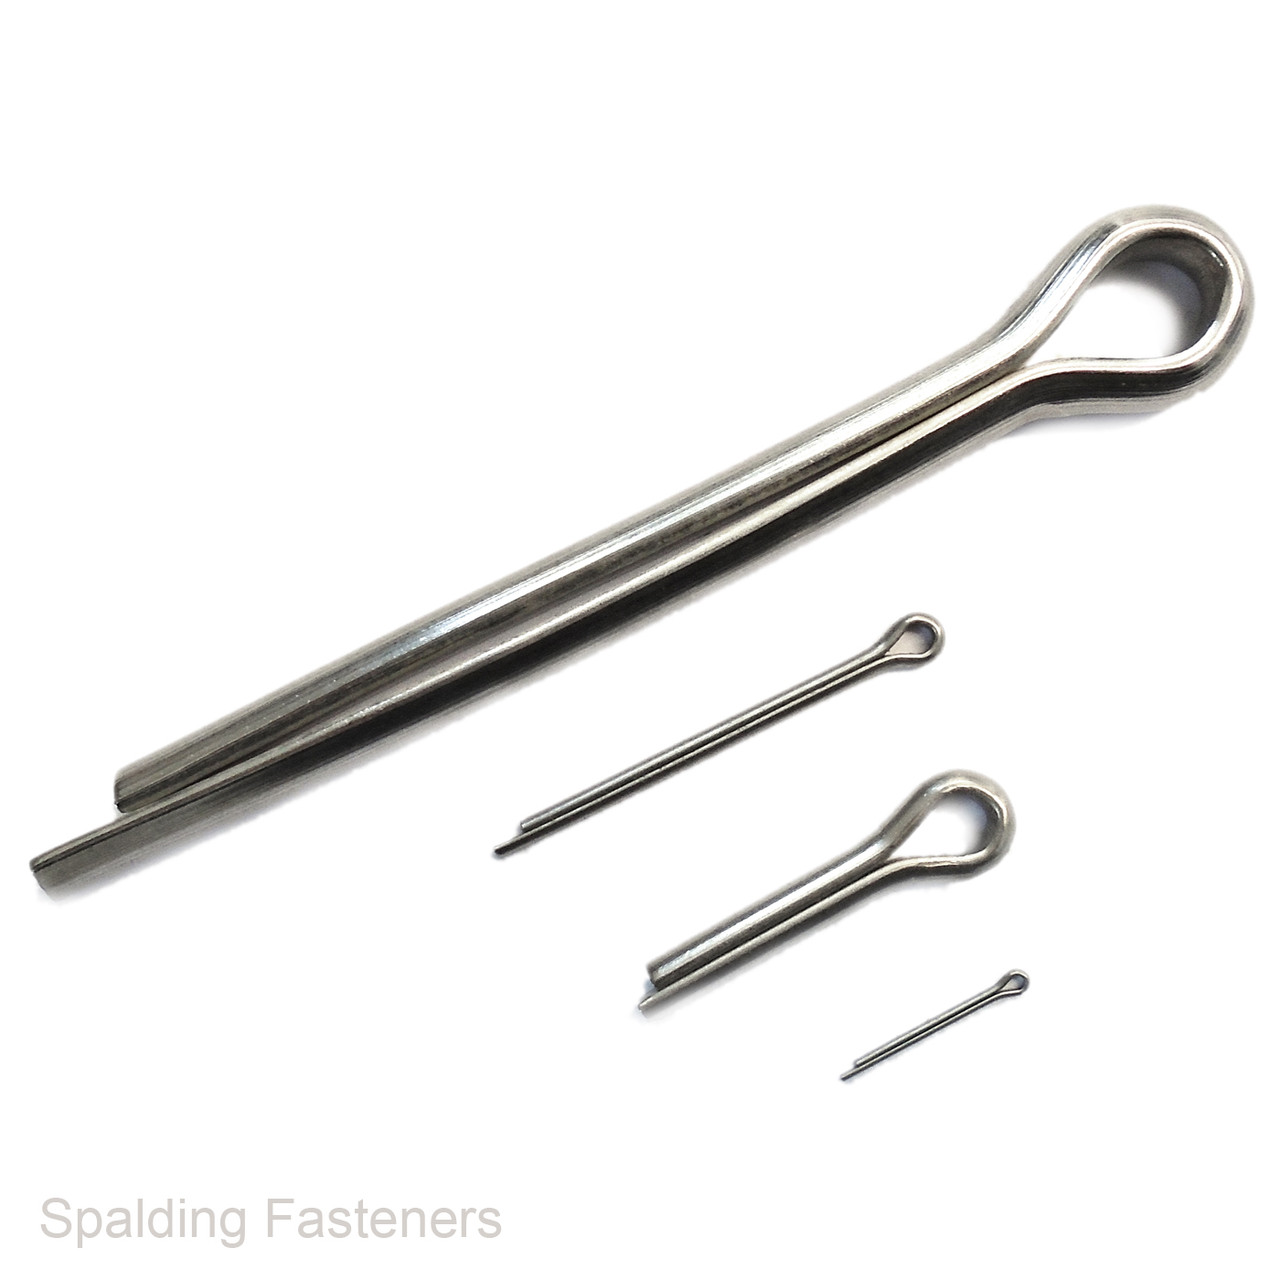 5/16" A2 Grade Stainless Steel Split Cotter Pins